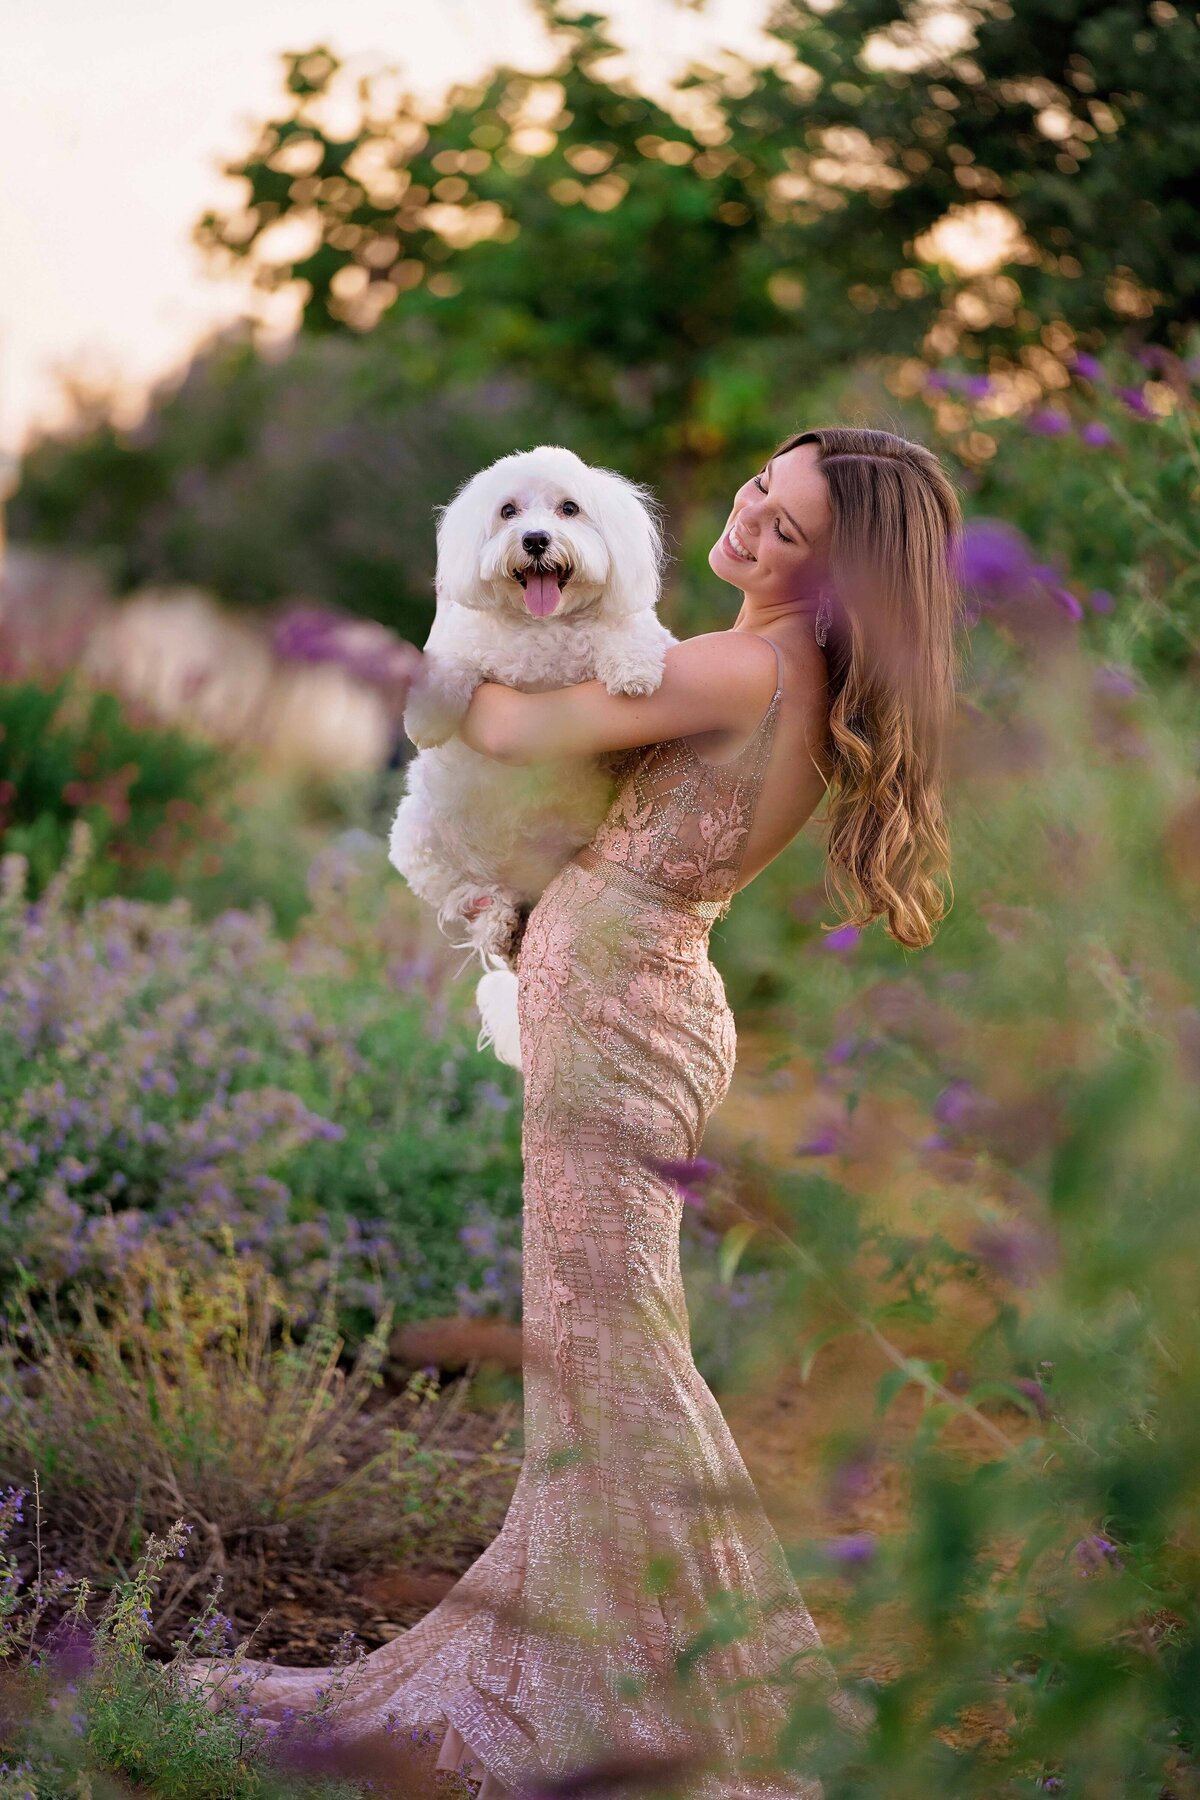 Young woman wearing a pink prom dress poses in a lavender field holding her white fluffy doodle dog.